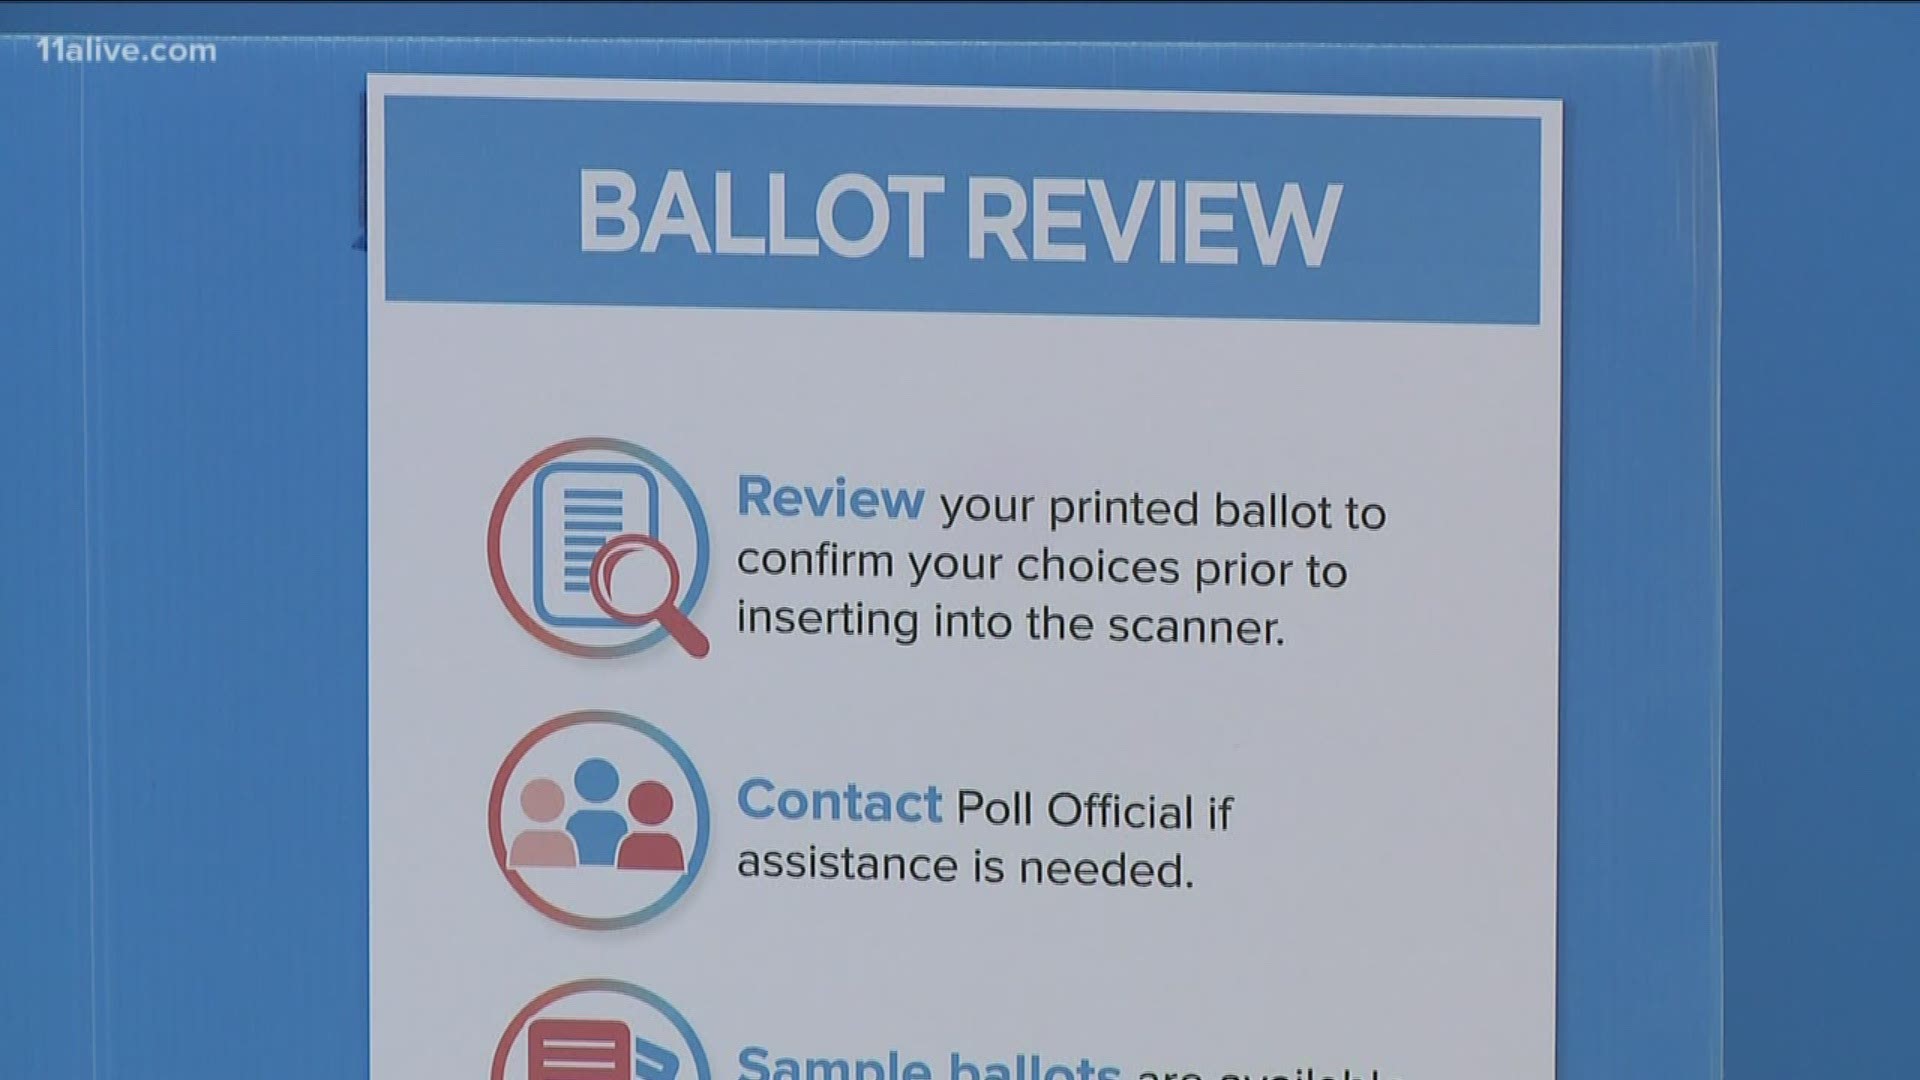 The Georgia Secretary of State has launched an investigation into two activists who have been critical of the state’s new voting system.